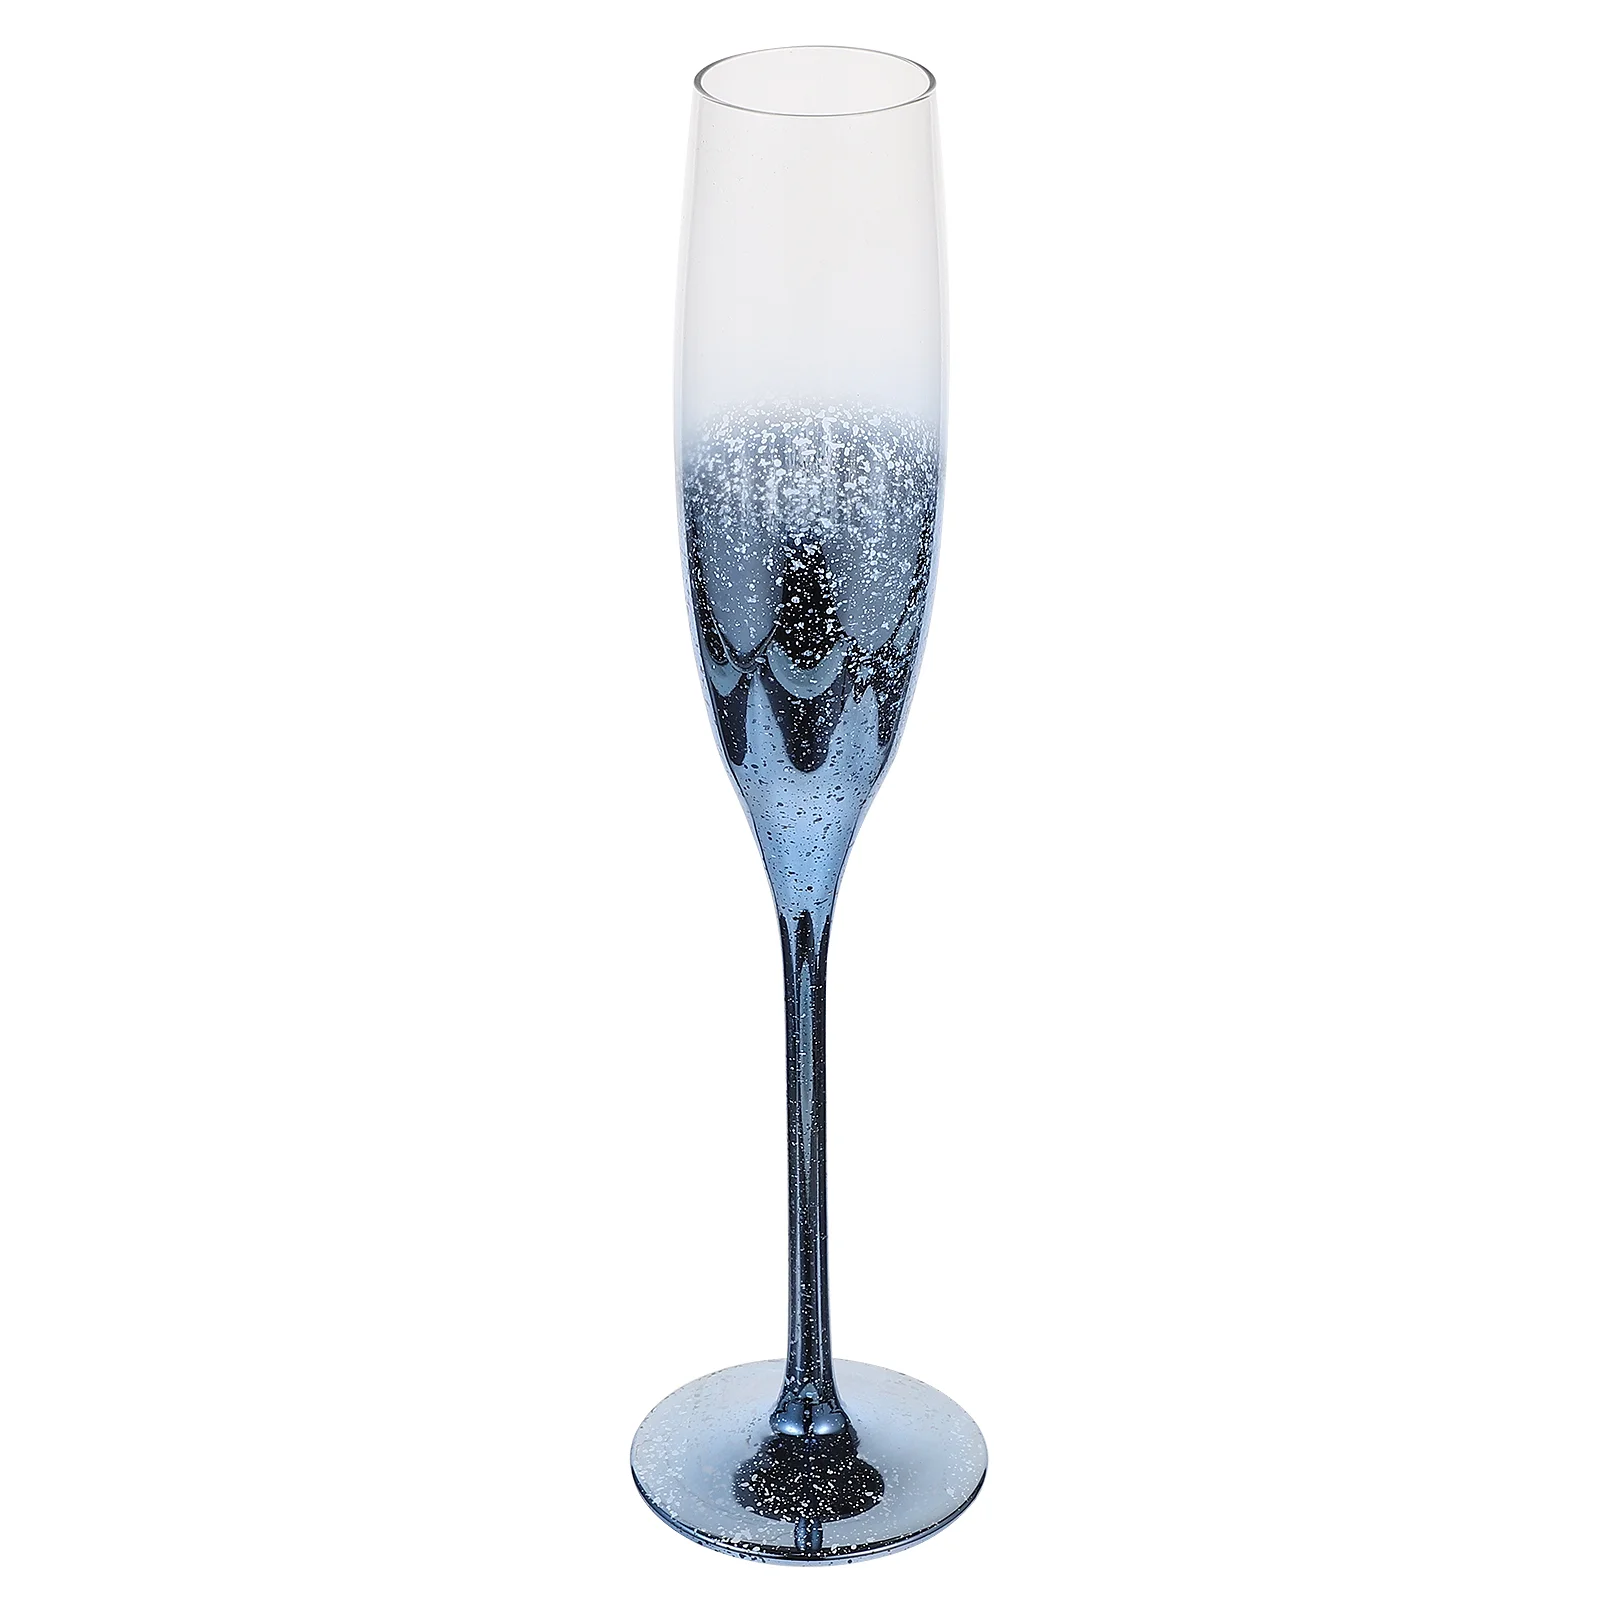 

Glasses Champagne Flute Toasting Stem Party Cups Cup Wedding Goblets Deluxe Glassware Tumbler Supplies Highball Cocktail Crystal